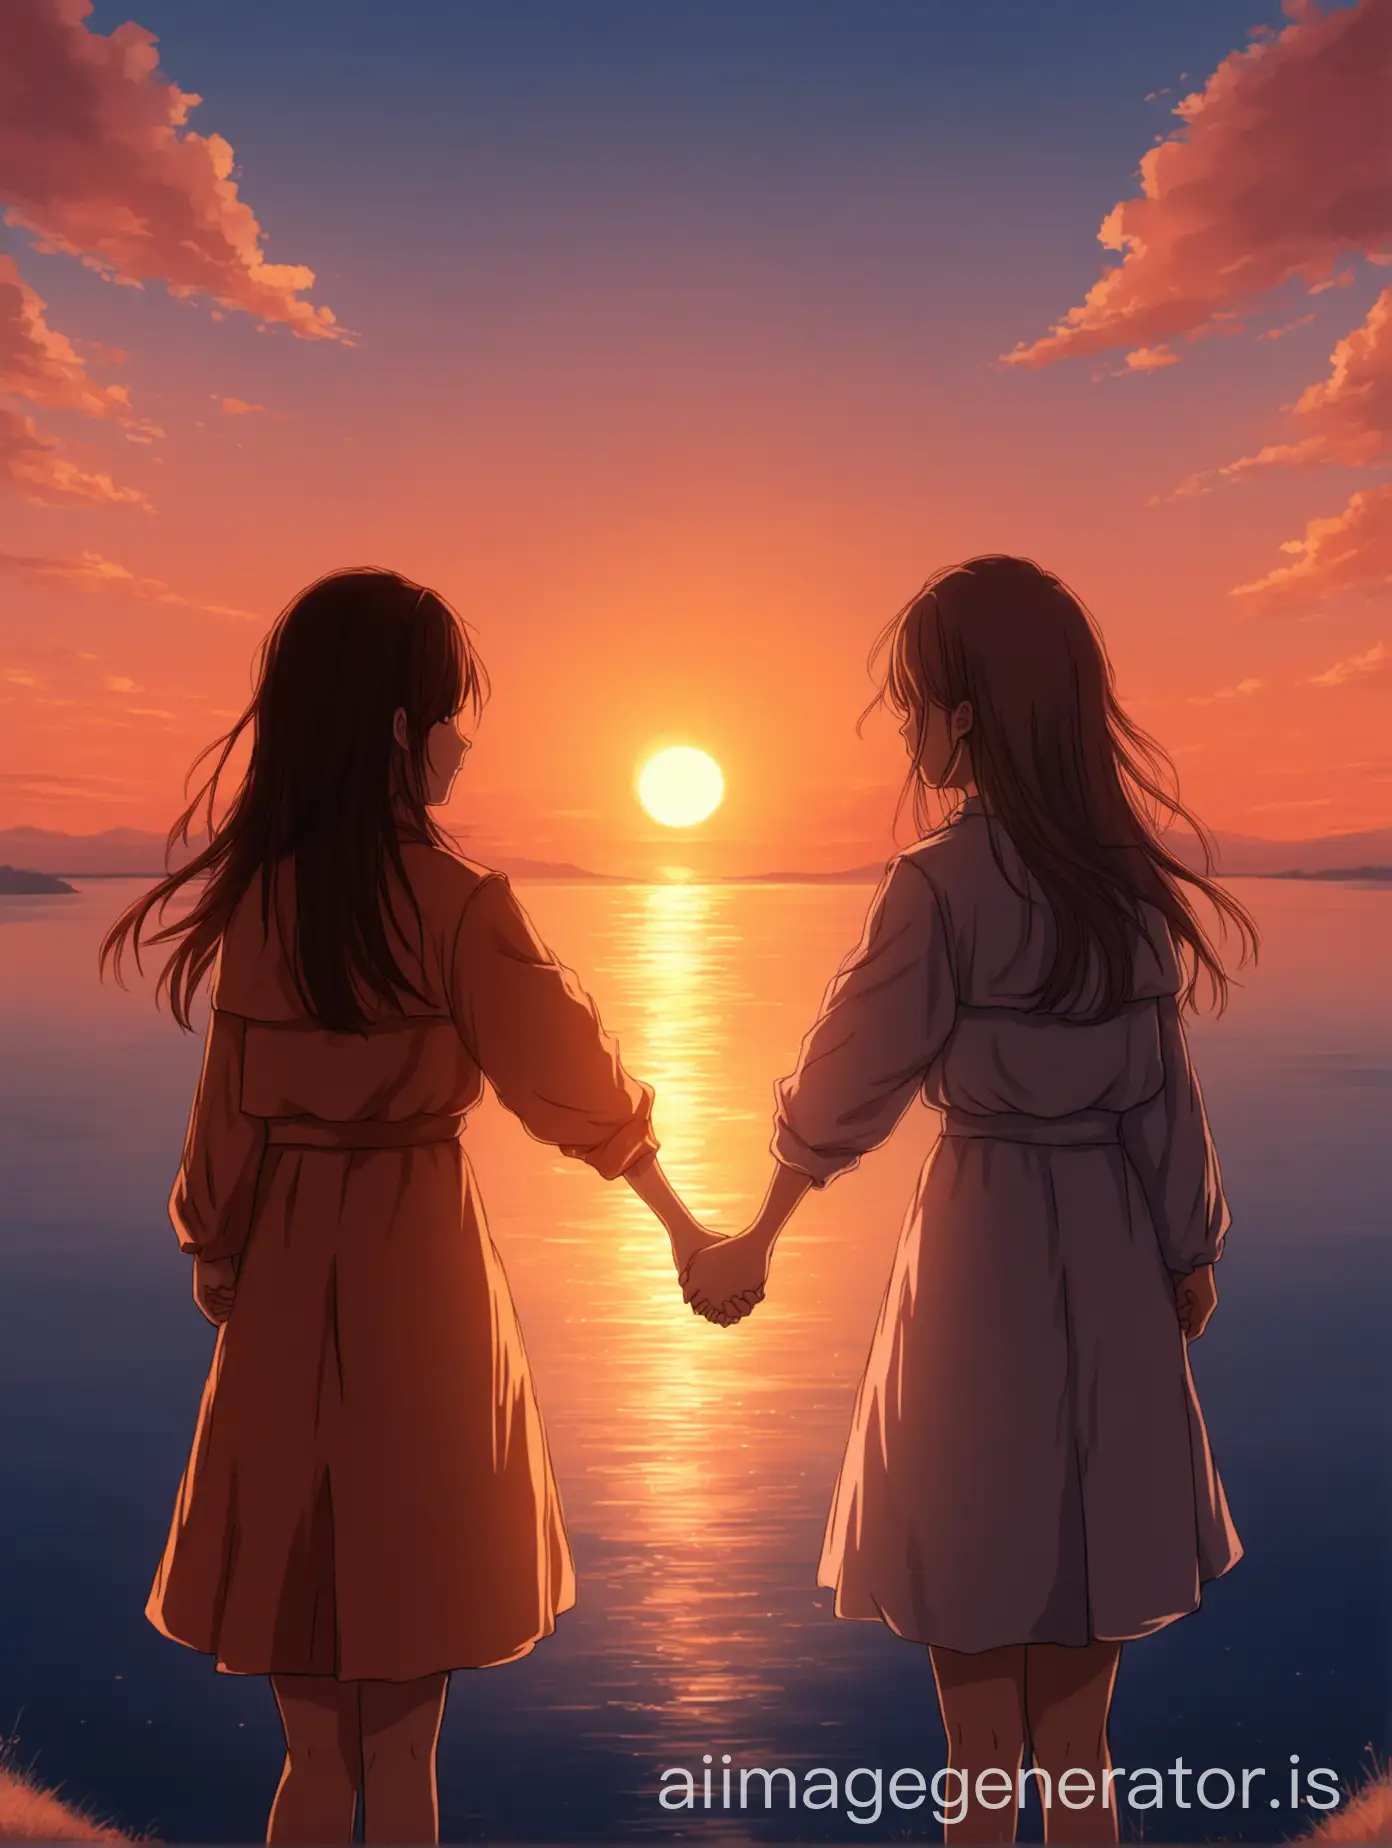 help me draw a poster of two girls holding hands, with a beautiful sunset background, the theme of the poster is reconcile with yourself